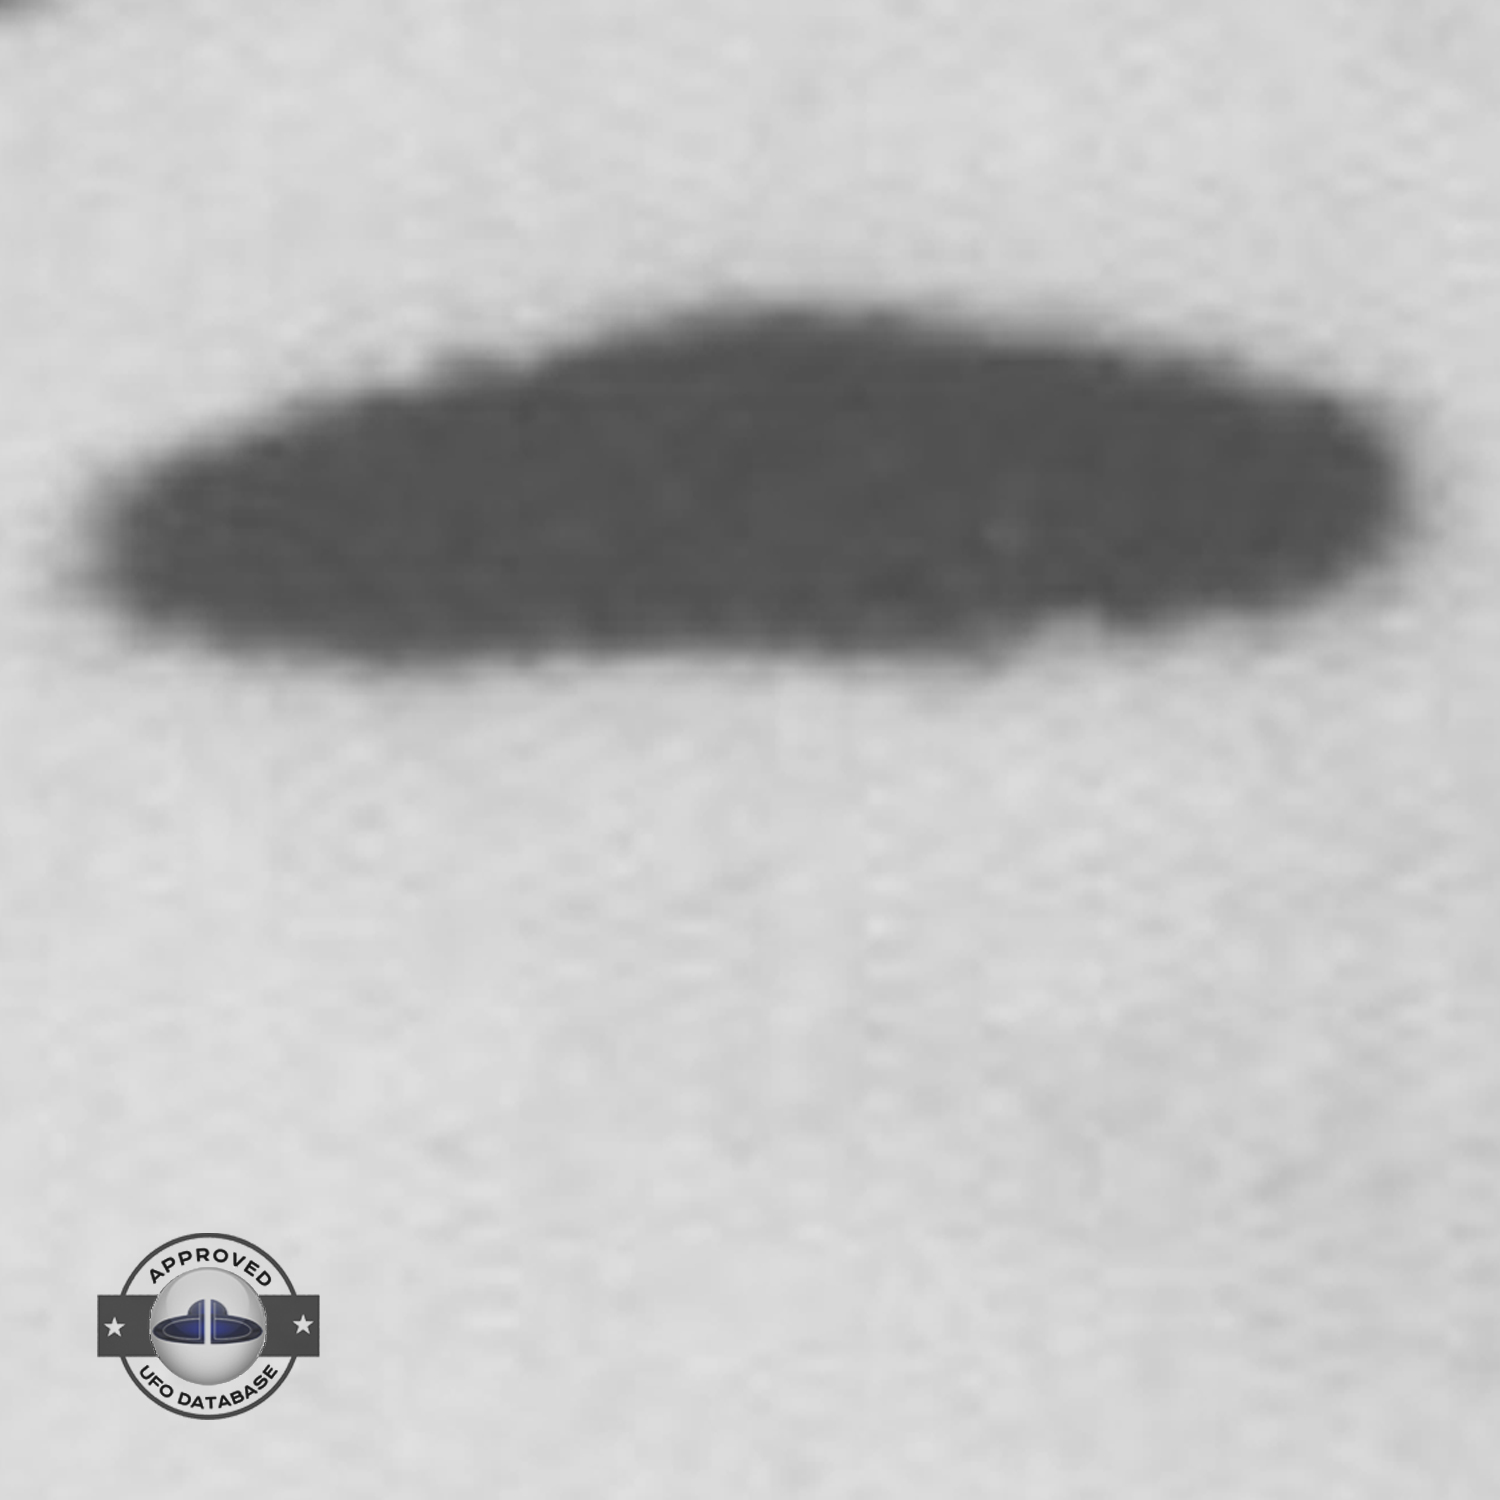 3 dark saucer shape UFOs near church in cathedral square of Sicuani UFO Picture #131-7